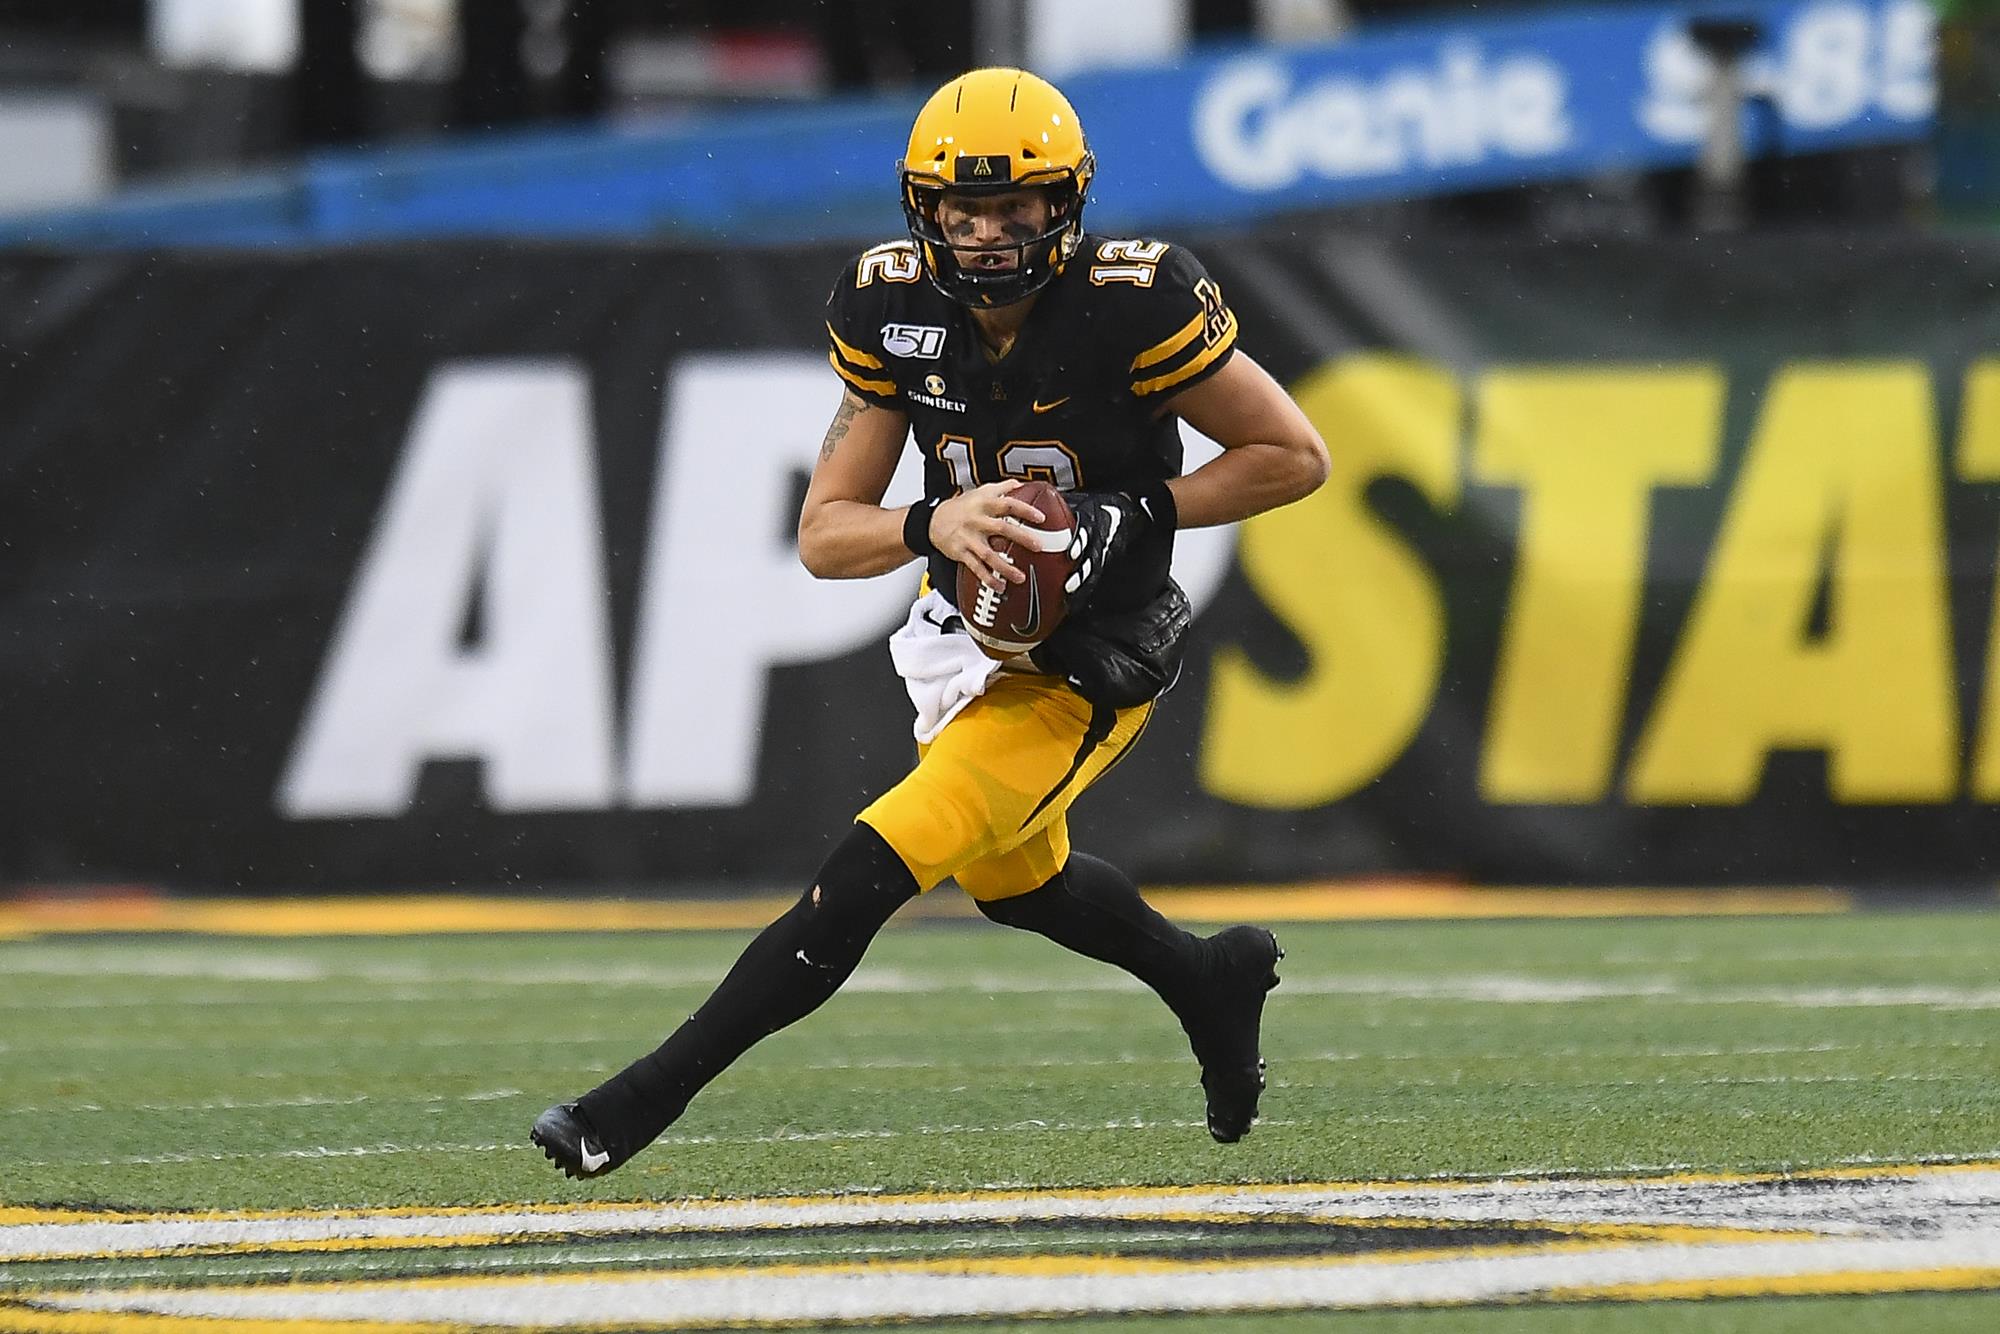 Zac Thomas QB from Appalachian State is the favorite to win Sun Belt OPOY